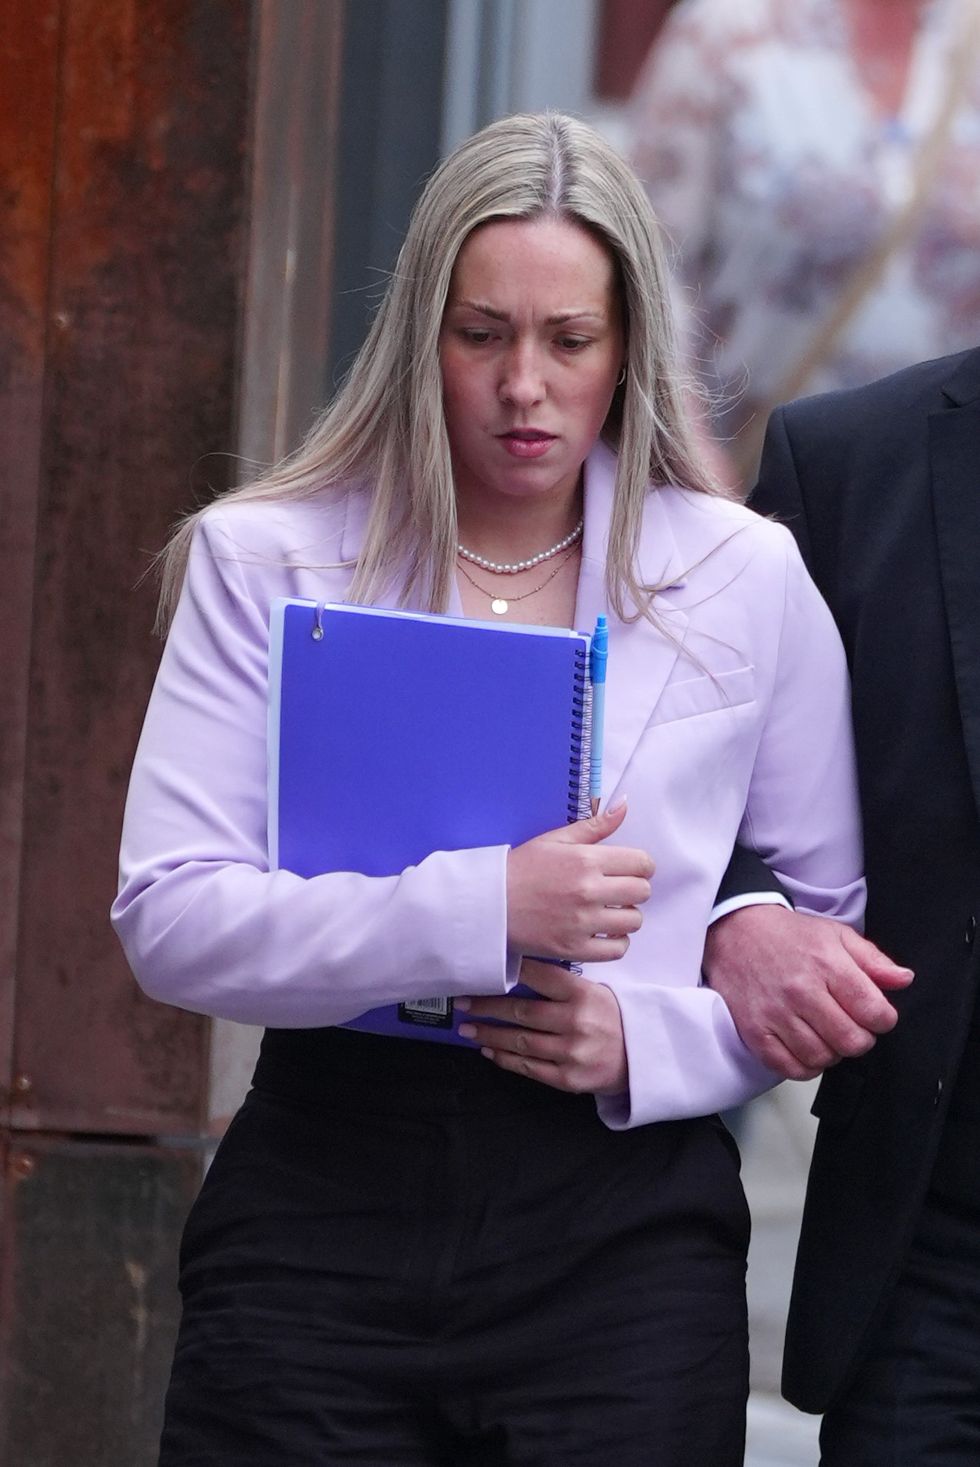 Female teacher found guilty of sexual activity with two schoolboys